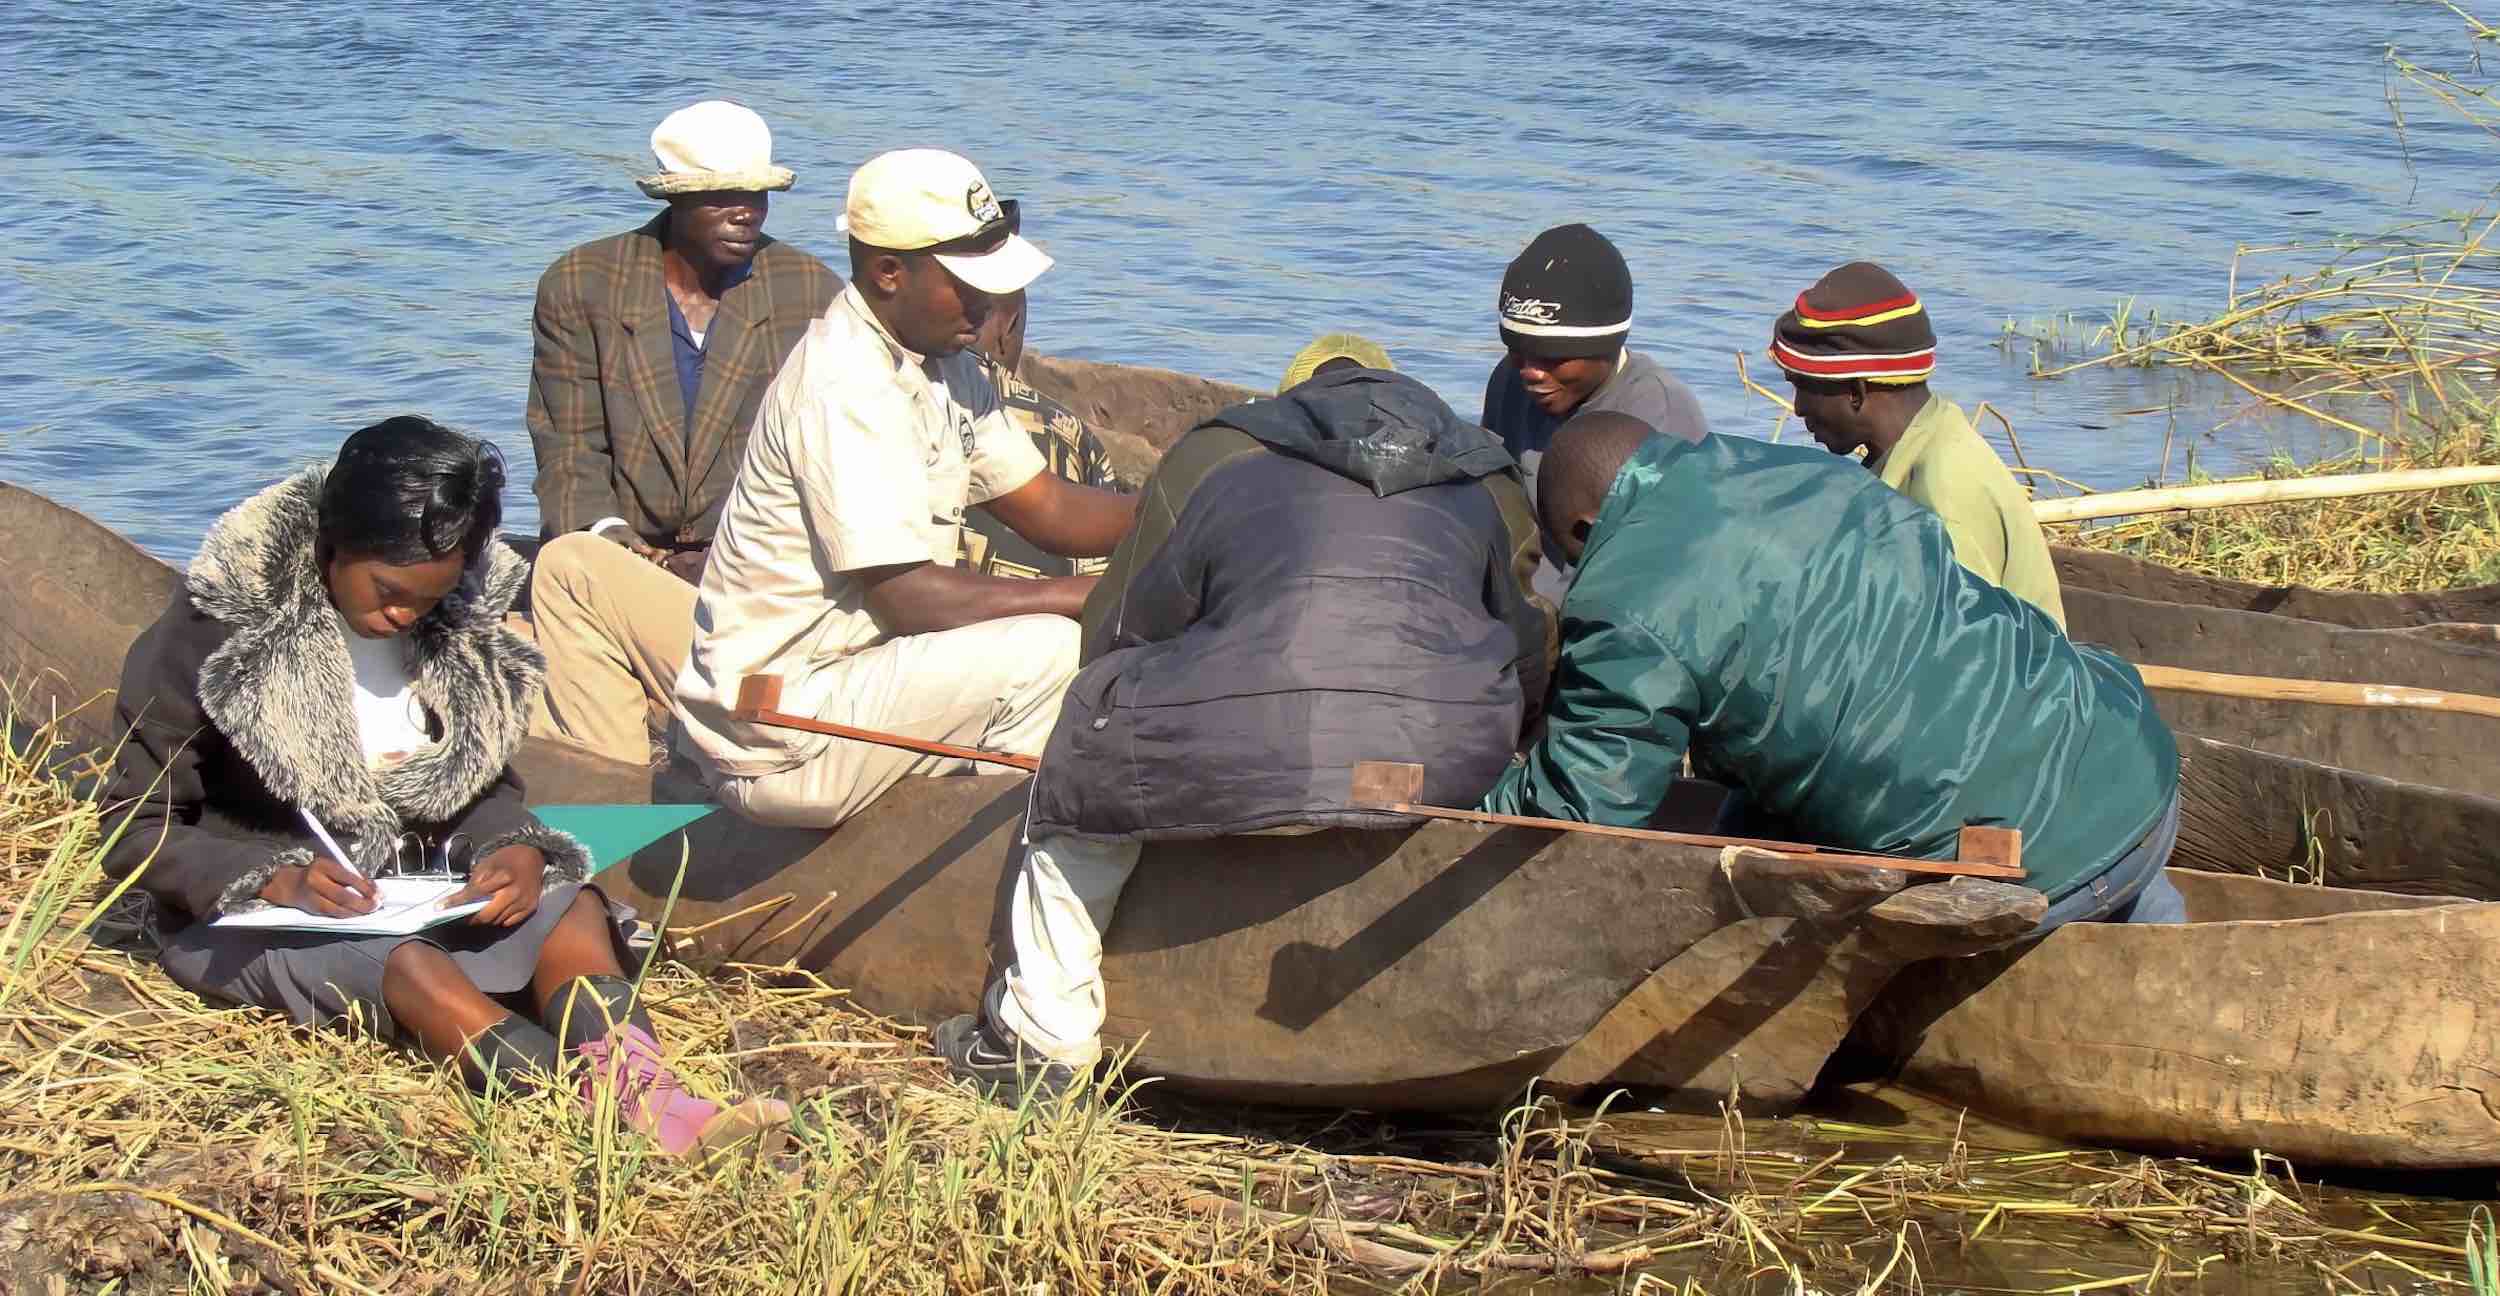 A woman records details on a clipboard, while a group of men look at the contents of a small boat.